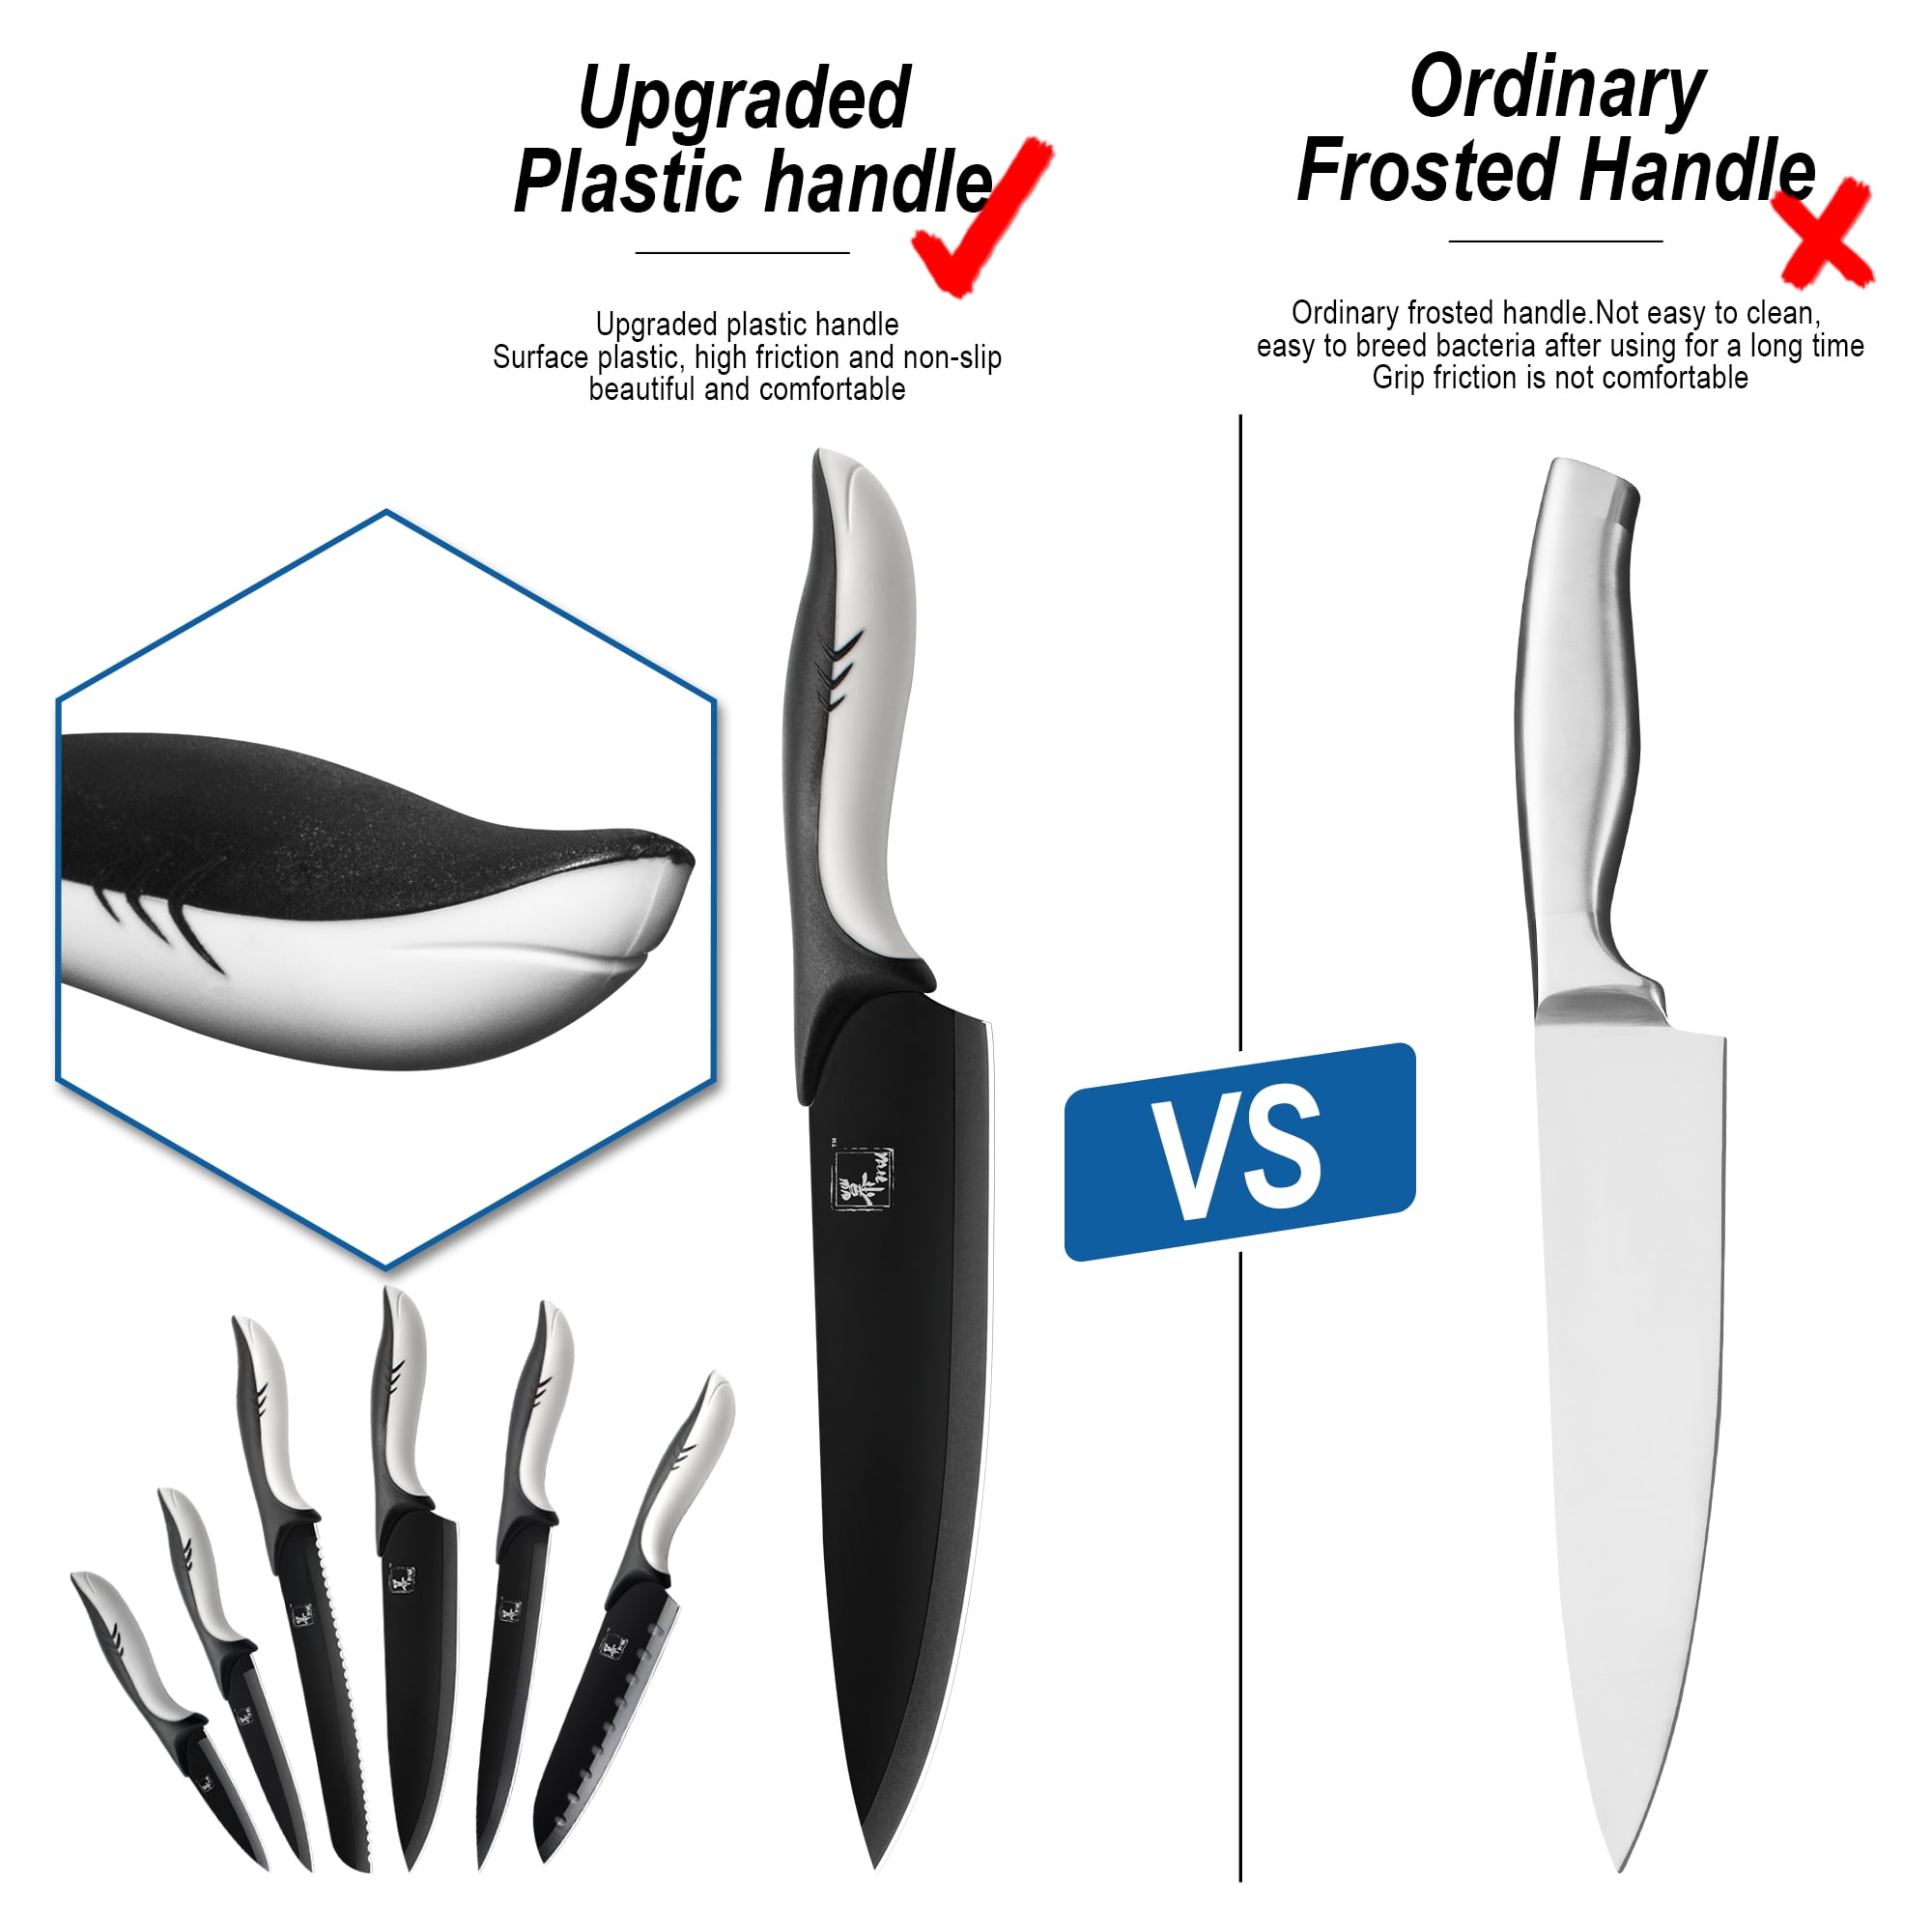 XYJ Authentic Since1986,Professional Knife Sets for Master Chefs,Slicing Cooking  Knife With Roll Bag,Cover,Scissors,Honing Steel,Culinary Chef Knives,Paring,Santoku,Bread,Slice  Knives - Yahoo Shopping